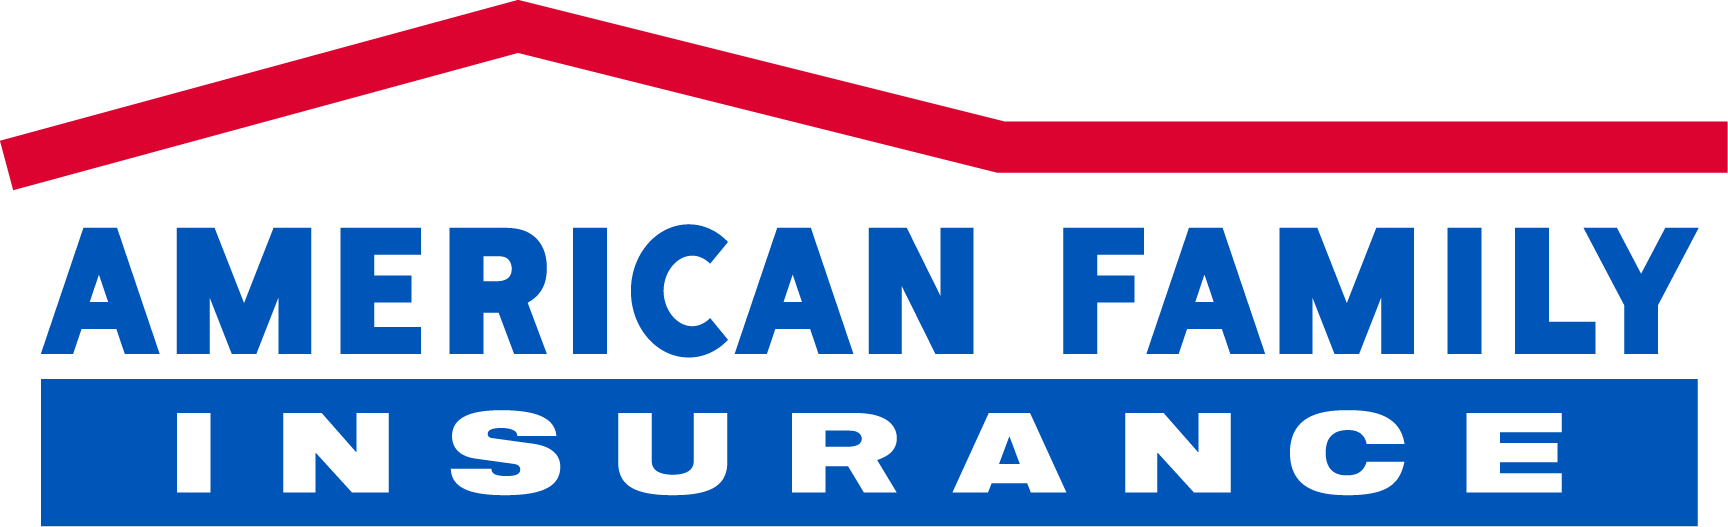 AmFam Logo - American Family Insurance Quotes for Auto, Home, Life and More ...